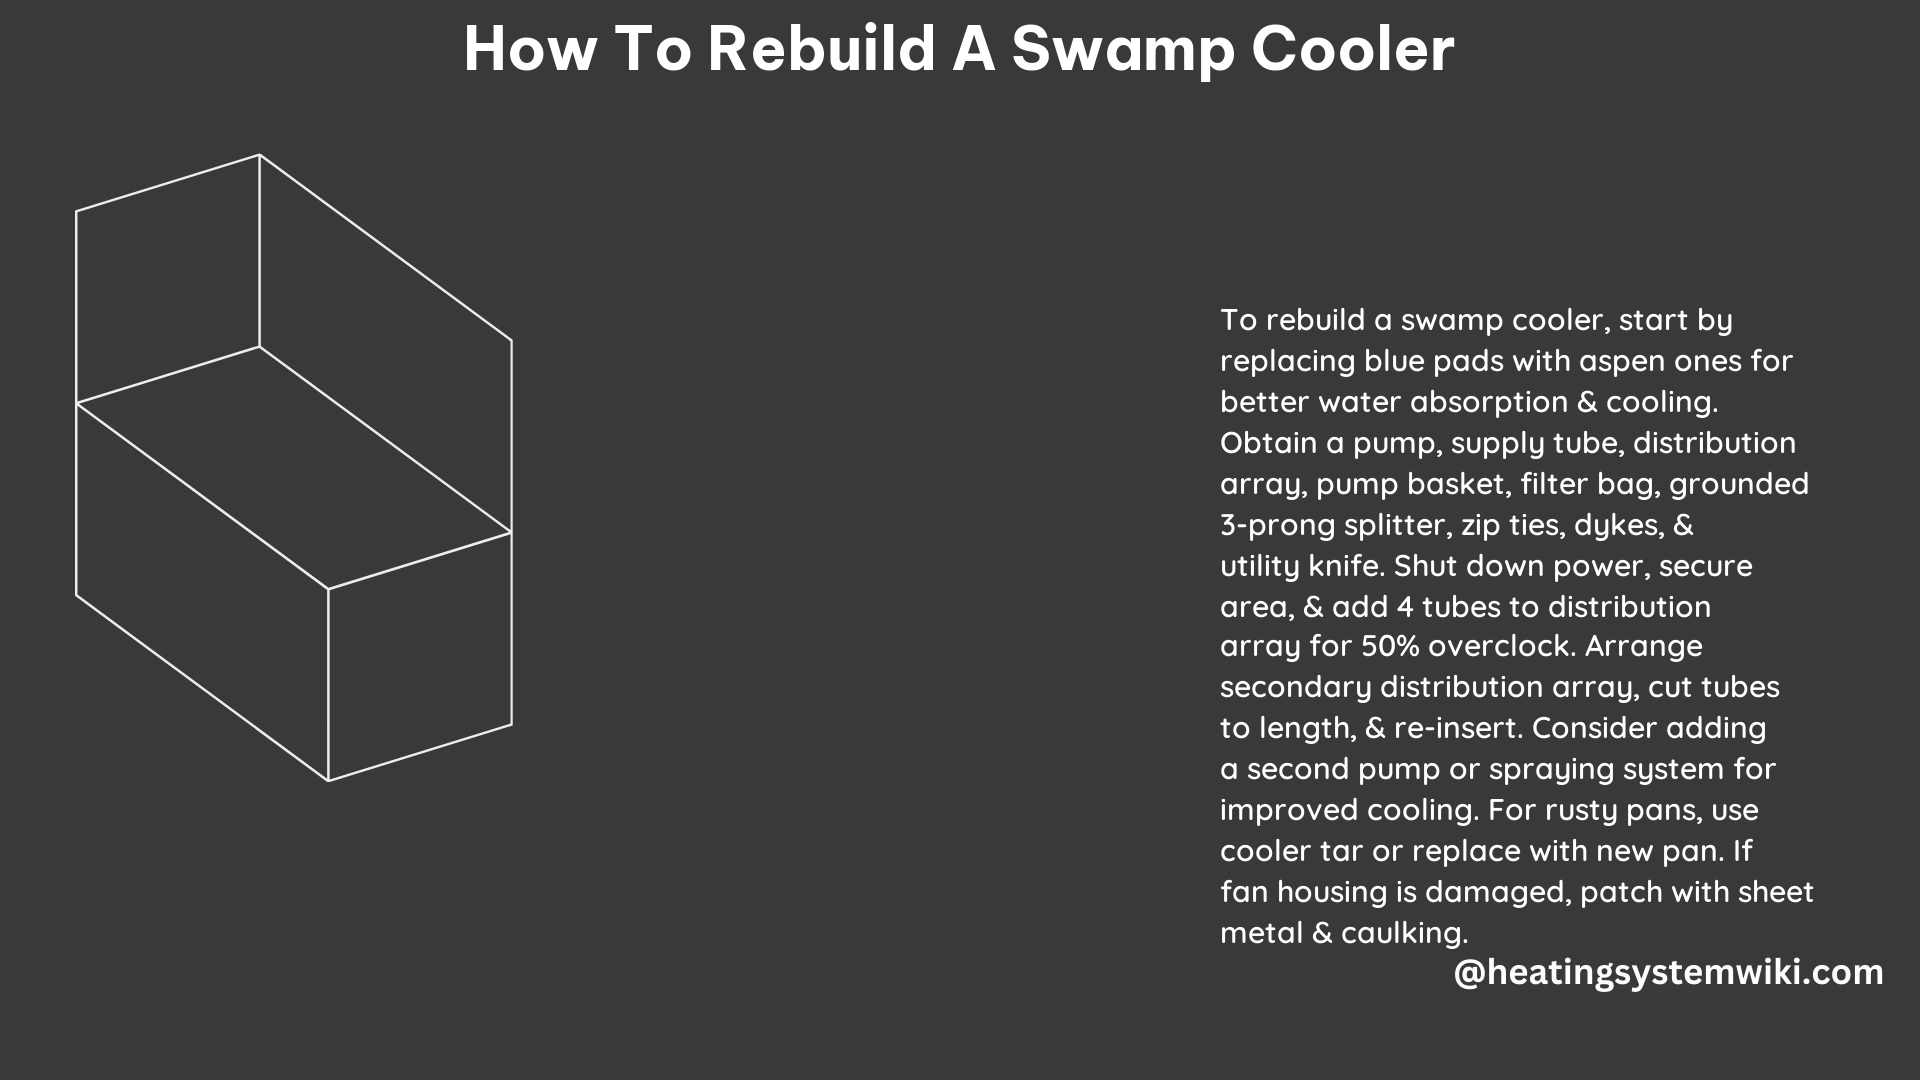 How to Rebuild a Swamp Cooler